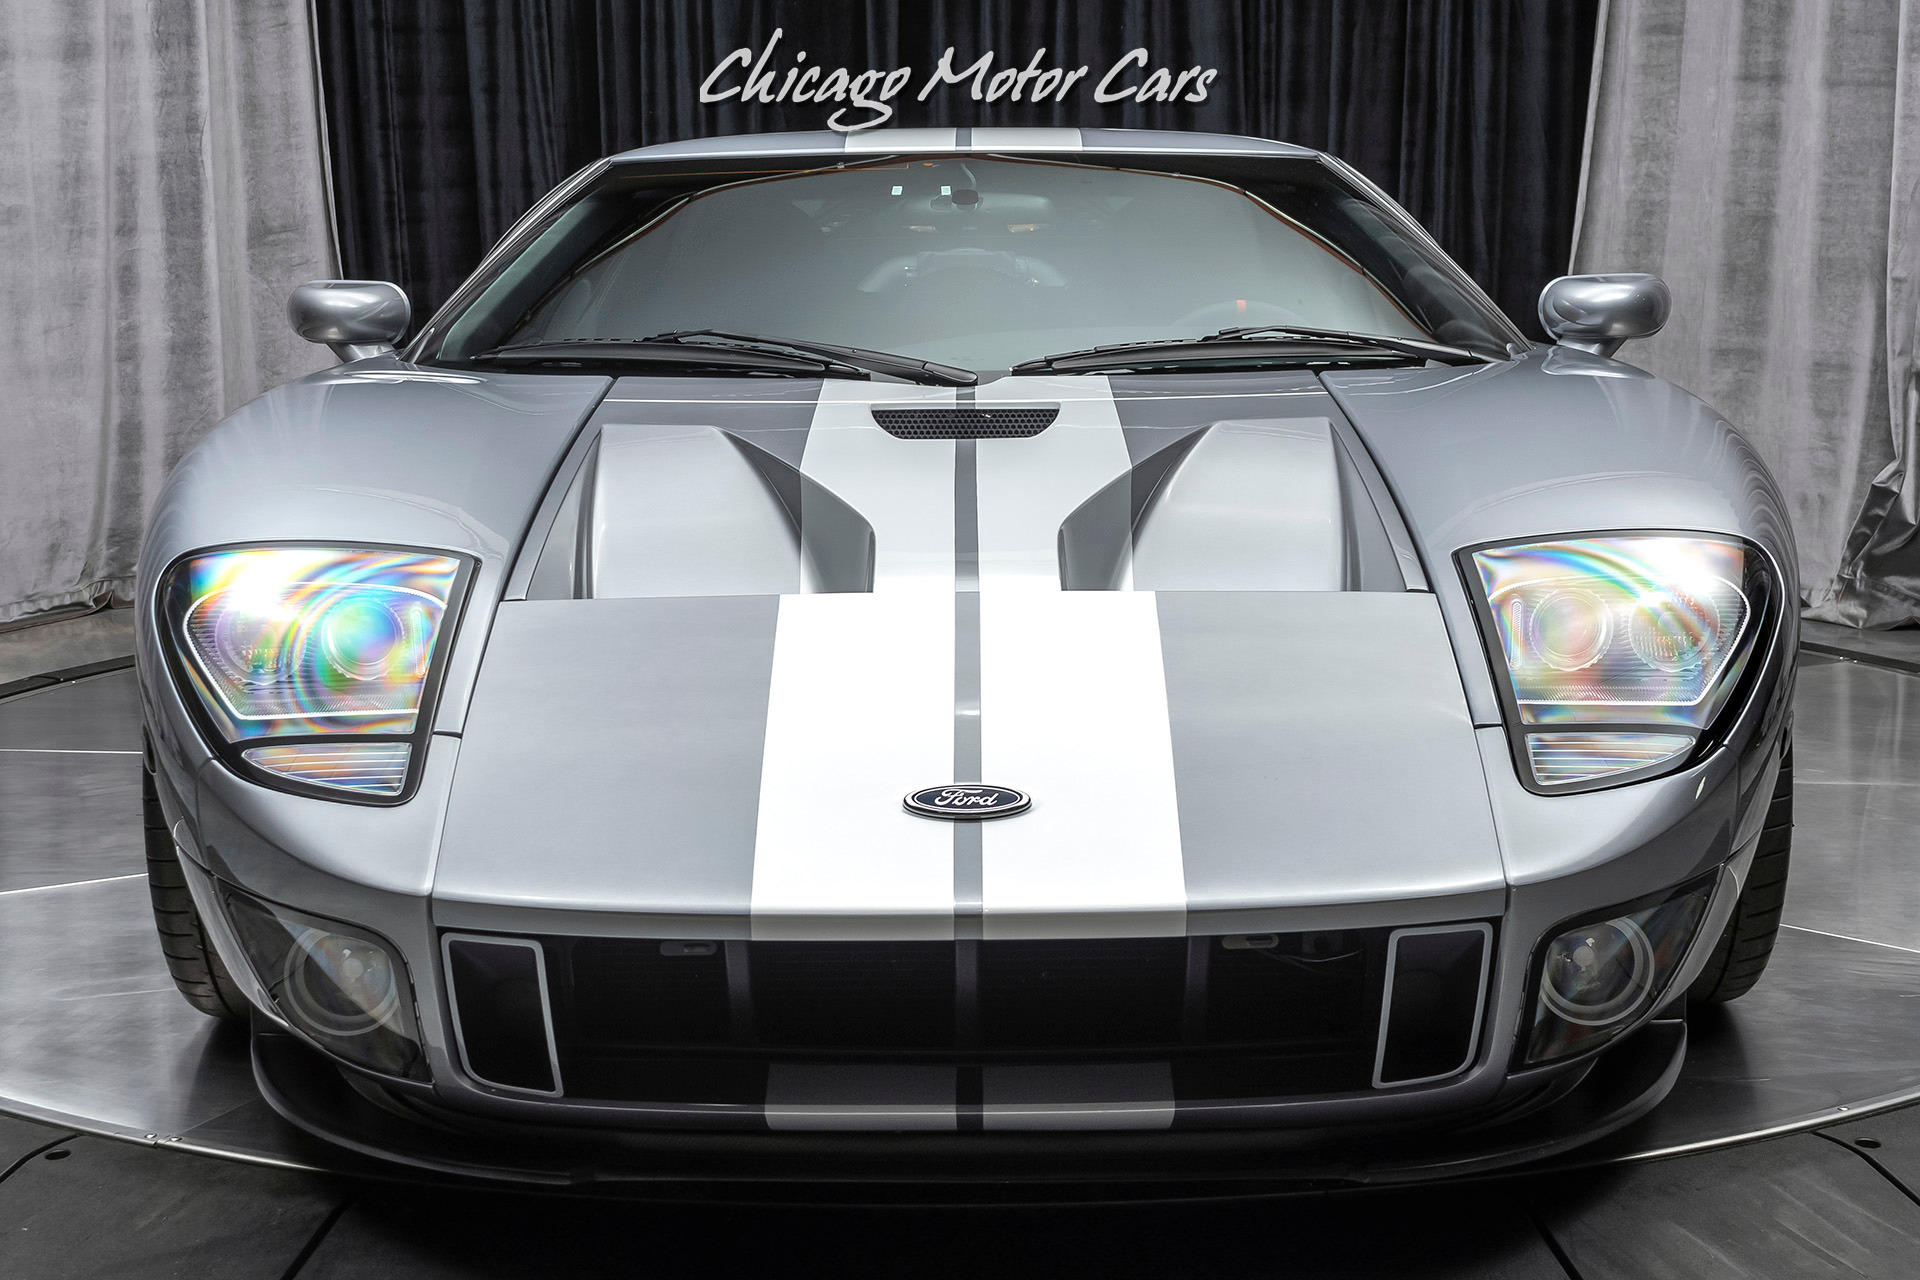 Used-2006-Ford-GT-Coupe-HEFFNER-Twin-Turbo-CARBON-EDITION-150K-in-UPGRADES